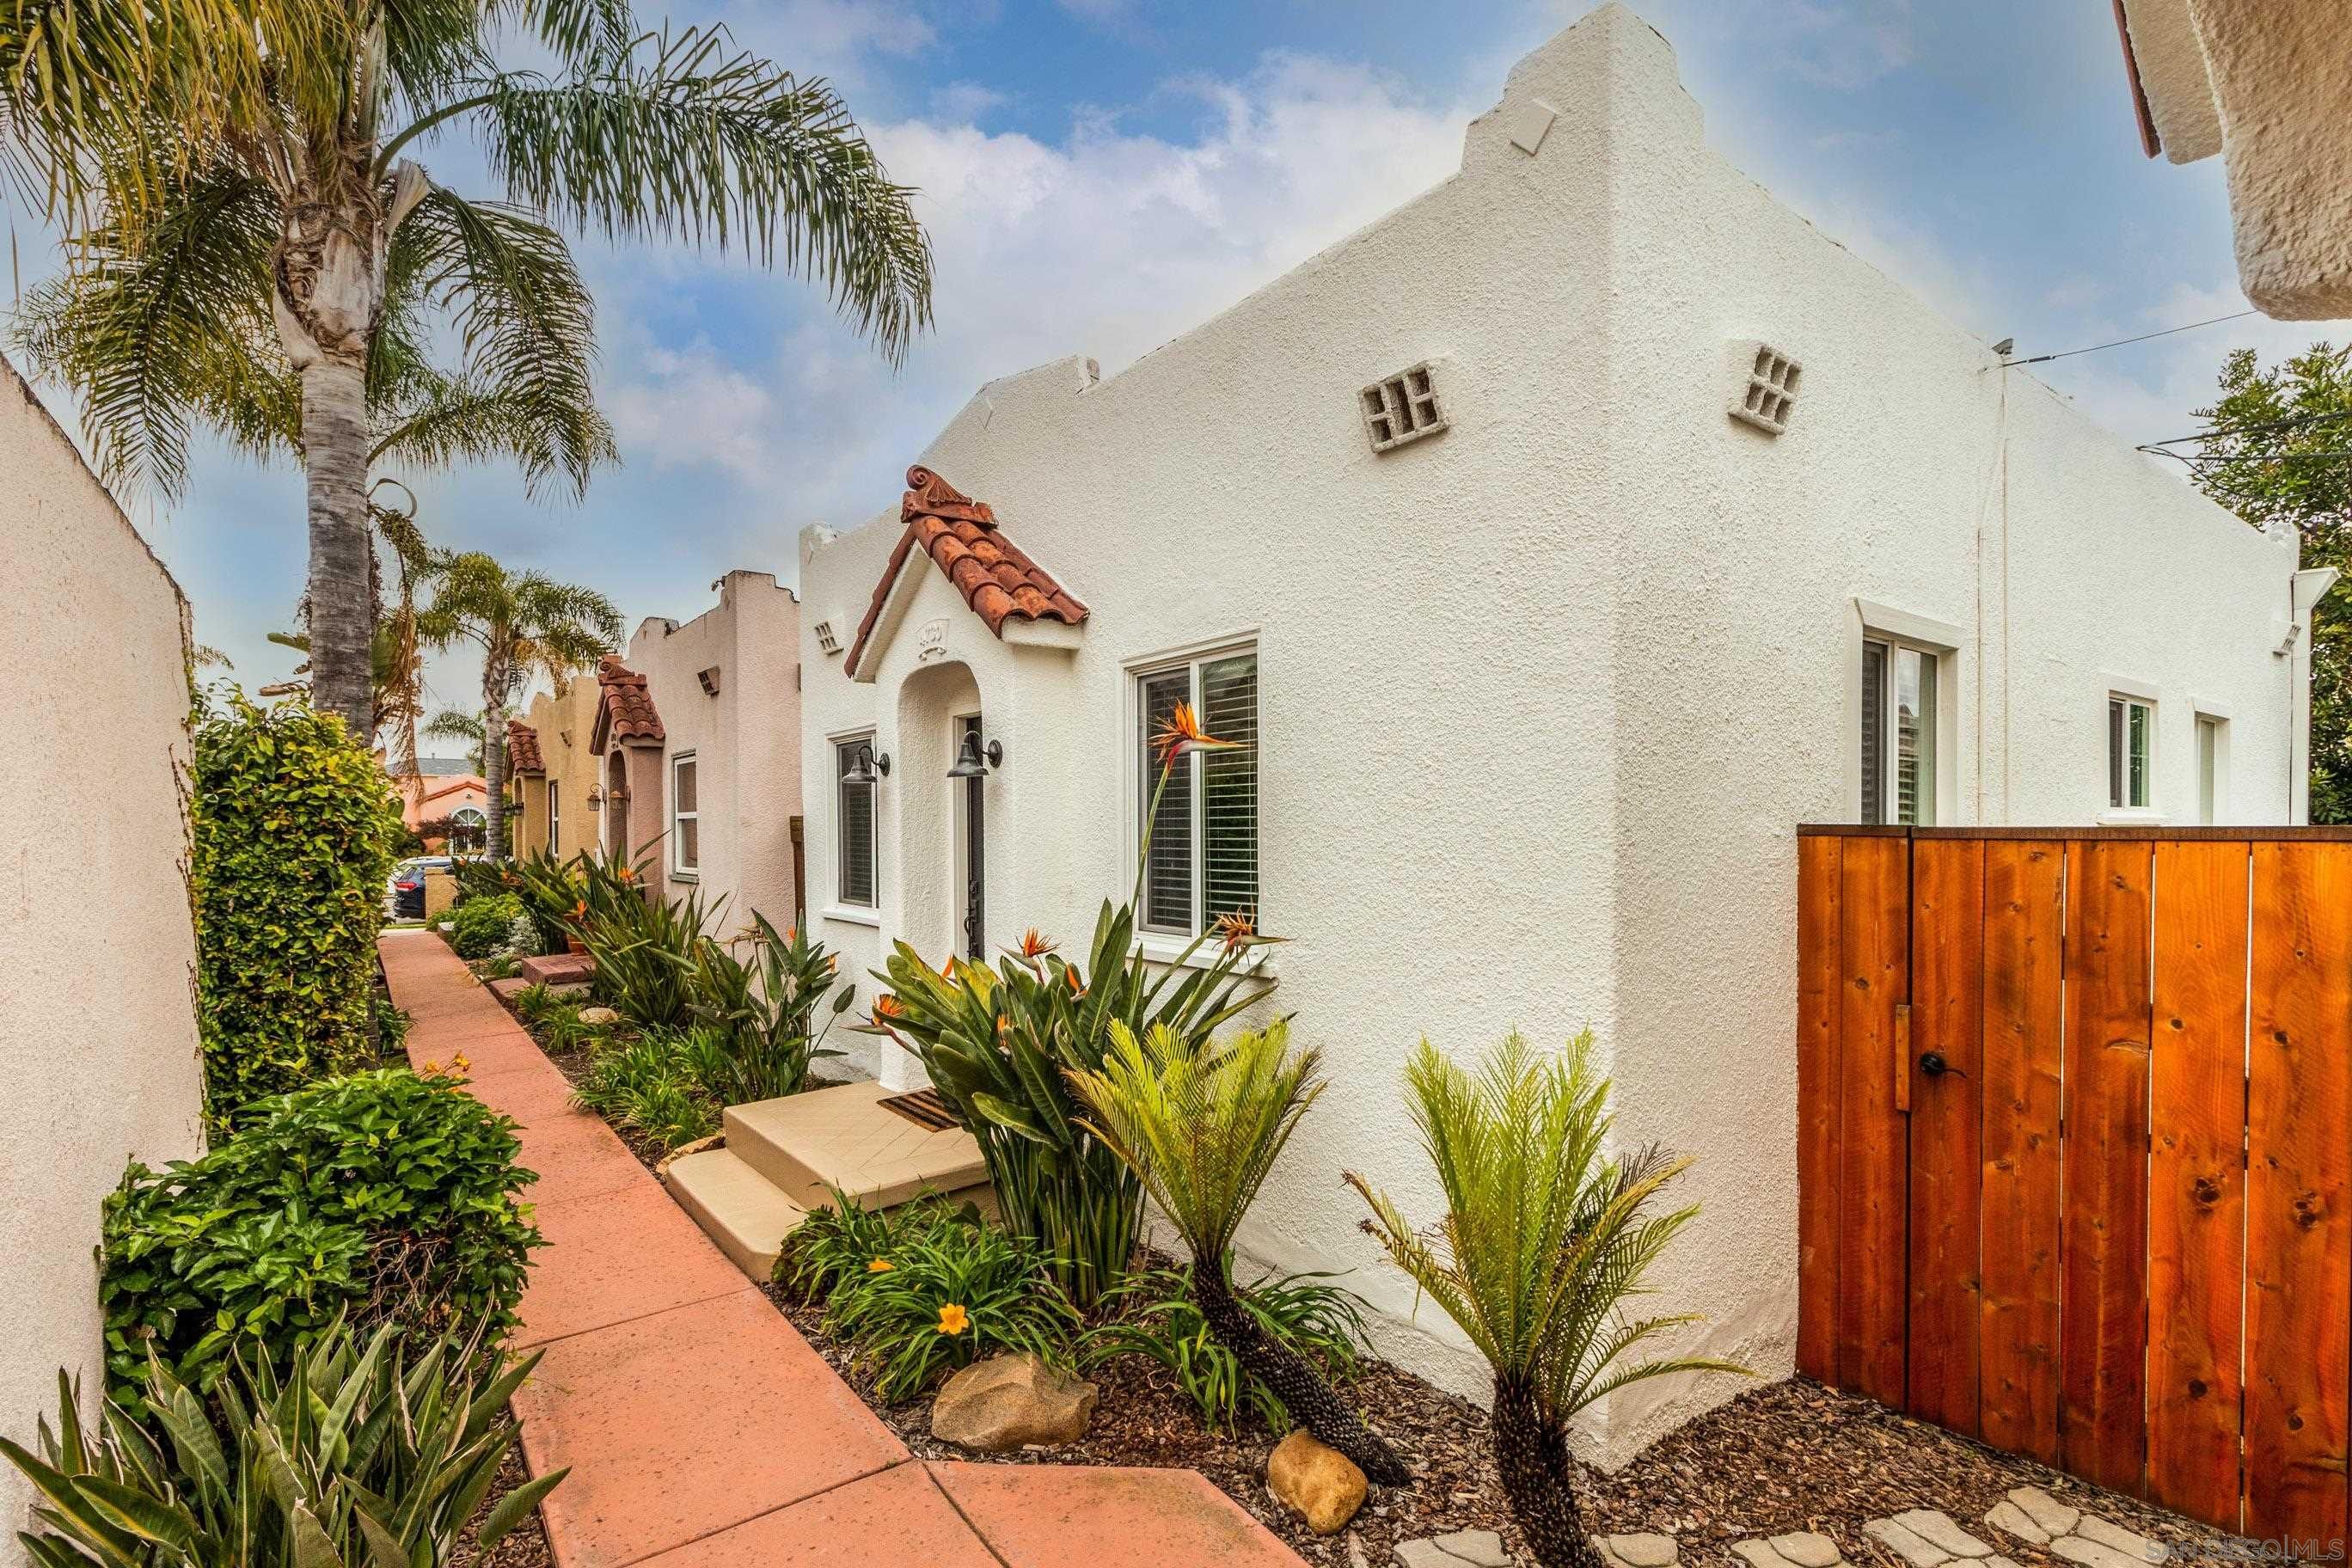 New property listed in Metro Uptown, San Diego